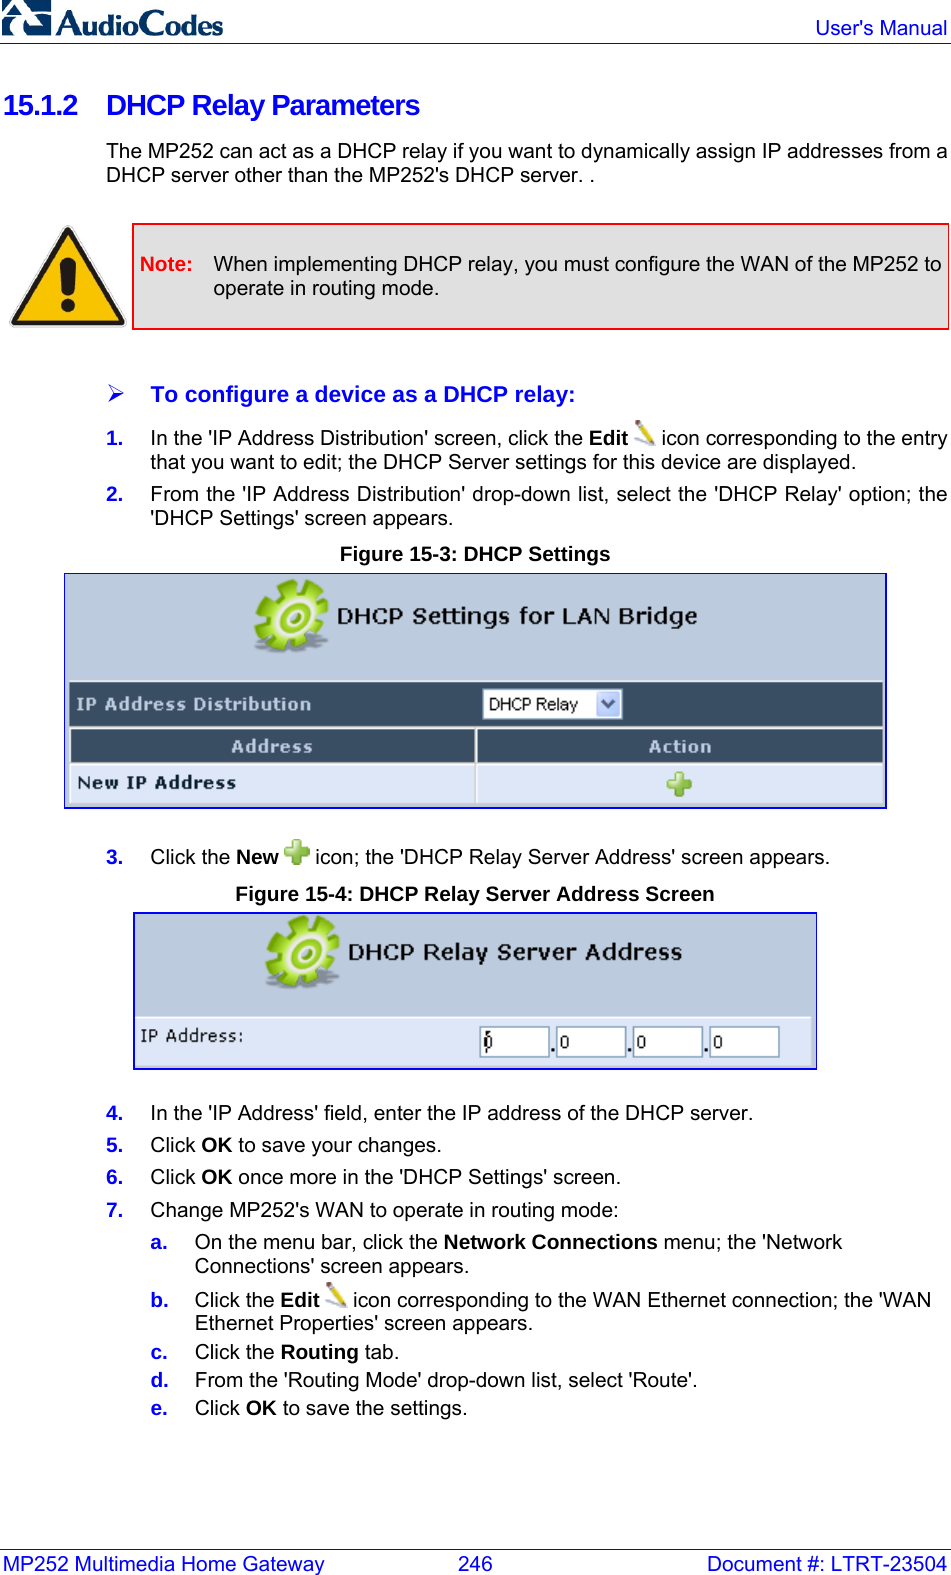 MP252 Multimedia Home Gateway  246  Document #: LTRT-23504  User&apos;s Manual  15.1.2  DHCP Relay Parameters The MP252 can act as a DHCP relay if you want to dynamically assign IP addresses from a DHCP server other than the MP252&apos;s DHCP server. .   Note:  When implementing DHCP relay, you must configure the WAN of the MP252 to operate in routing mode.  ¾ To configure a device as a DHCP relay: 1.  In the &apos;IP Address Distribution&apos; screen, click the Edit  icon corresponding to the entry that you want to edit; the DHCP Server settings for this device are displayed.  2.  From the &apos;IP Address Distribution&apos; drop-down list, select the &apos;DHCP Relay&apos; option; the &apos;DHCP Settings&apos; screen appears. Figure 15-3: DHCP Settings  3.  Click the New   icon; the &apos;DHCP Relay Server Address&apos; screen appears.  Figure 15-4: DHCP Relay Server Address Screen  4.  In the &apos;IP Address&apos; field, enter the IP address of the DHCP server. 5.  Click OK to save your changes. 6.  Click OK once more in the &apos;DHCP Settings&apos; screen. 7.  Change MP252&apos;s WAN to operate in routing mode: a.  On the menu bar, click the Network Connections menu; the &apos;Network Connections&apos; screen appears. b.  Click the Edit  icon corresponding to the WAN Ethernet connection; the &apos;WAN Ethernet Properties&apos; screen appears. c.  Click the Routing tab. d.  From the &apos;Routing Mode&apos; drop-down list, select &apos;Route&apos;. e.  Click OK to save the settings.  